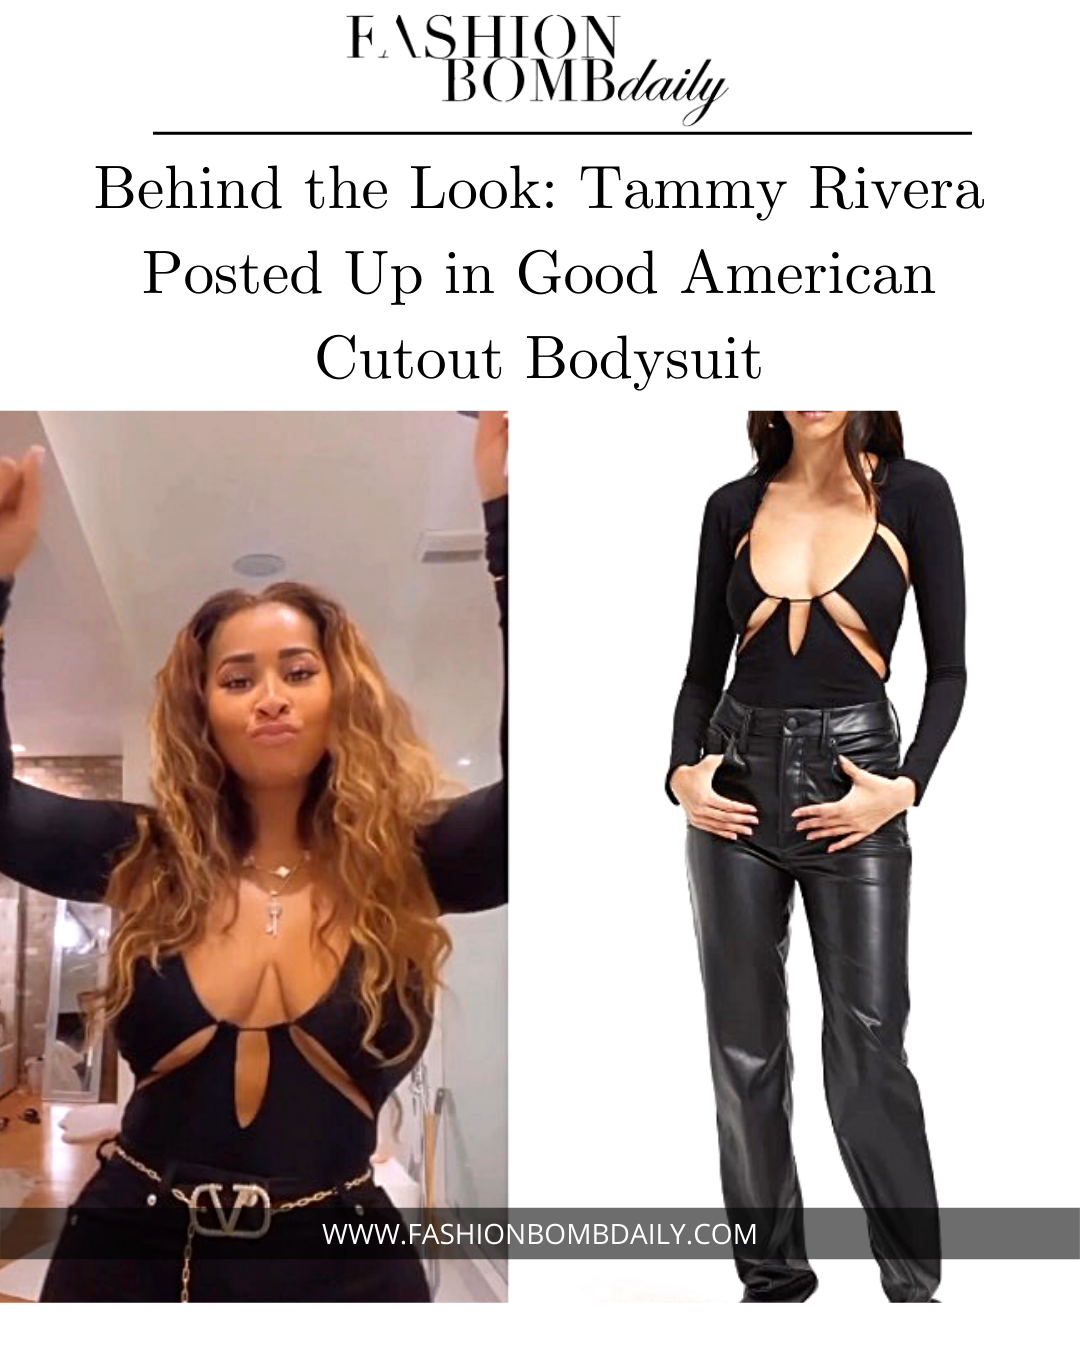 Posted-by-Tammy-Rivera-in-Good-American-Cutout-Bodysuit.png